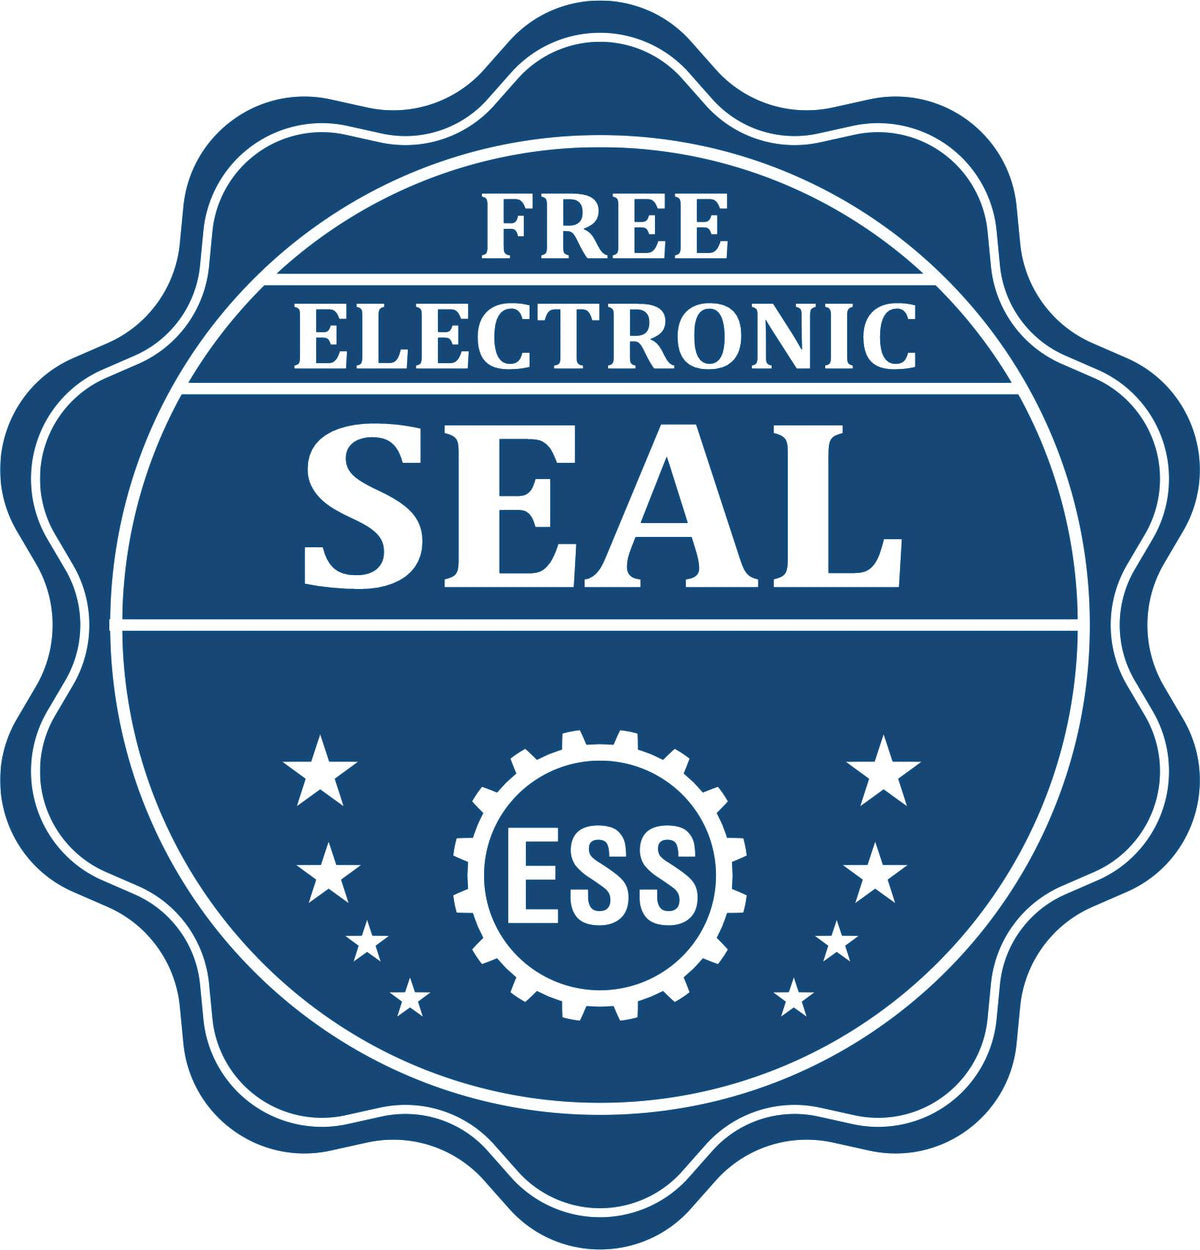 A badge showing a free electronic seal for the Colorado Desk Architect Embossing Seal with stars and the ESS gear on the emblem.